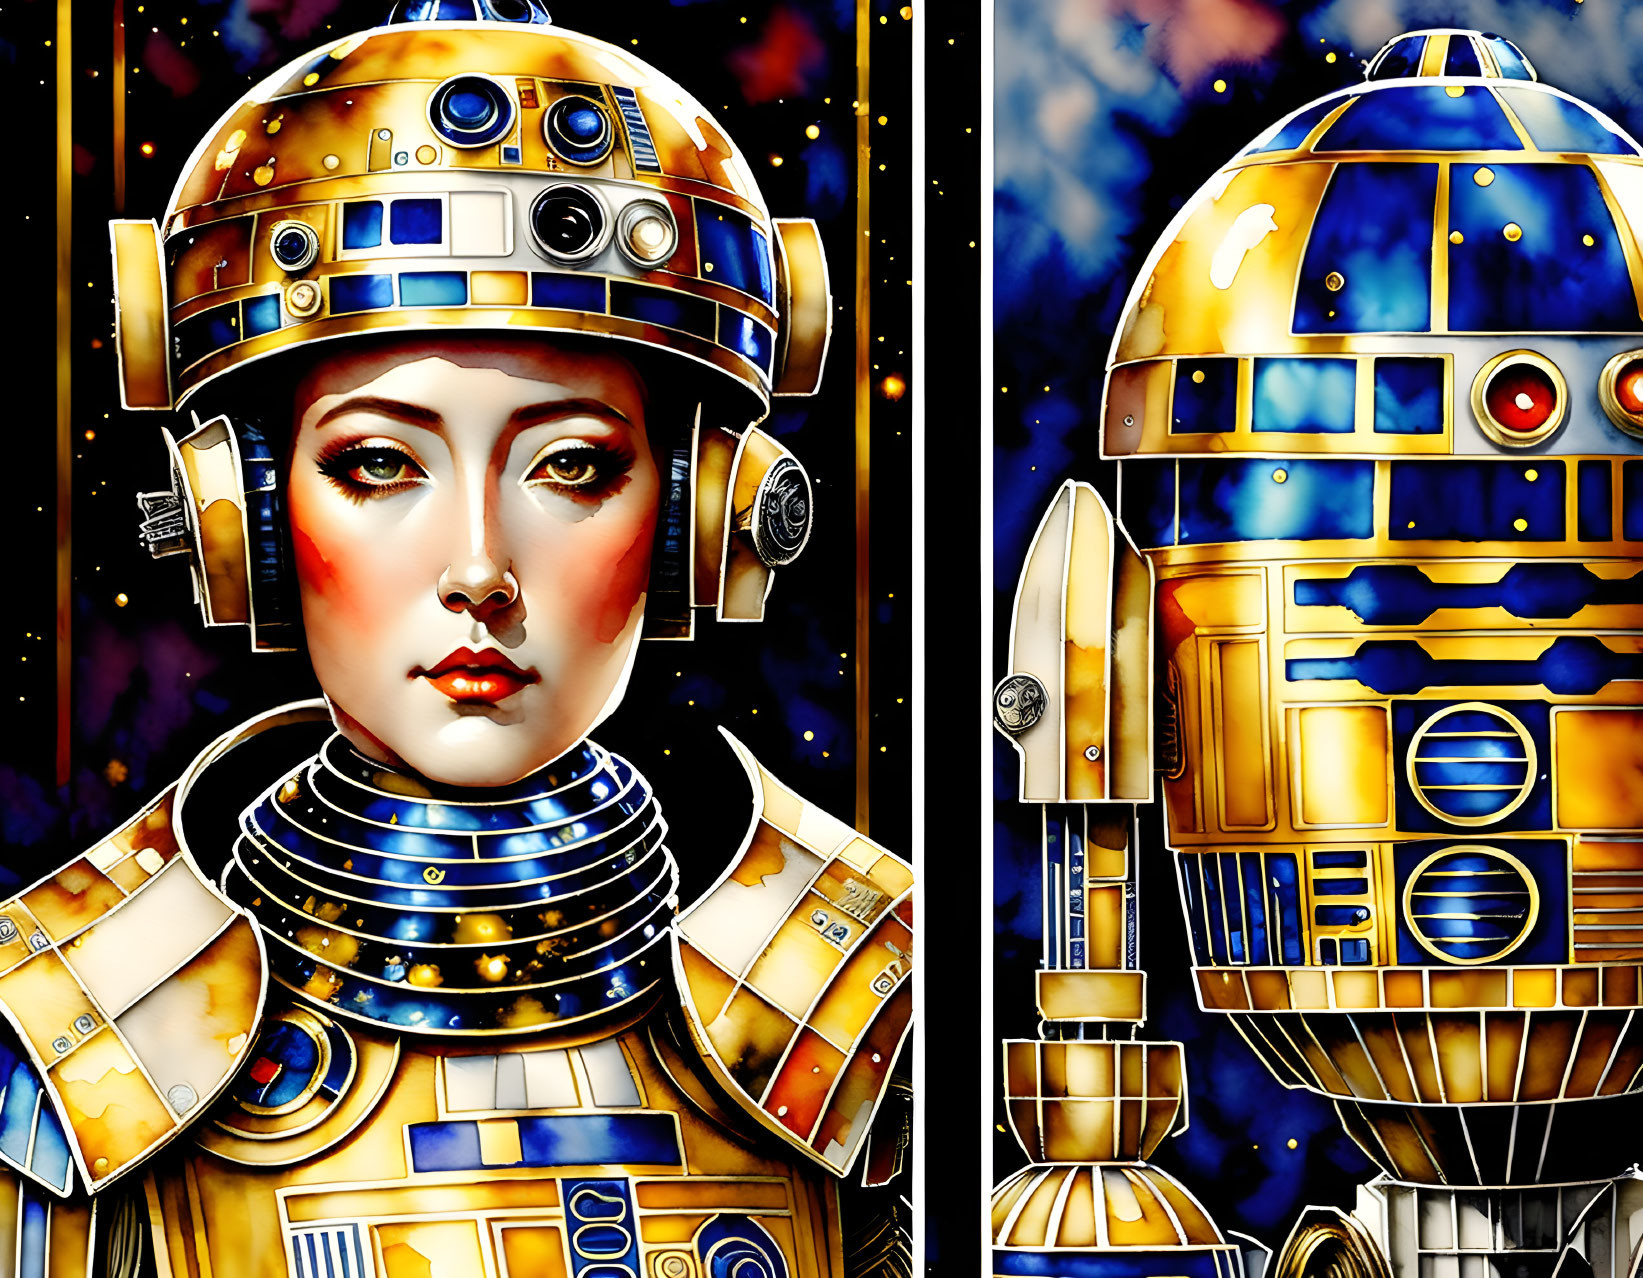 Golden-patterned robot figures resembling a female and sci-fi droid in space